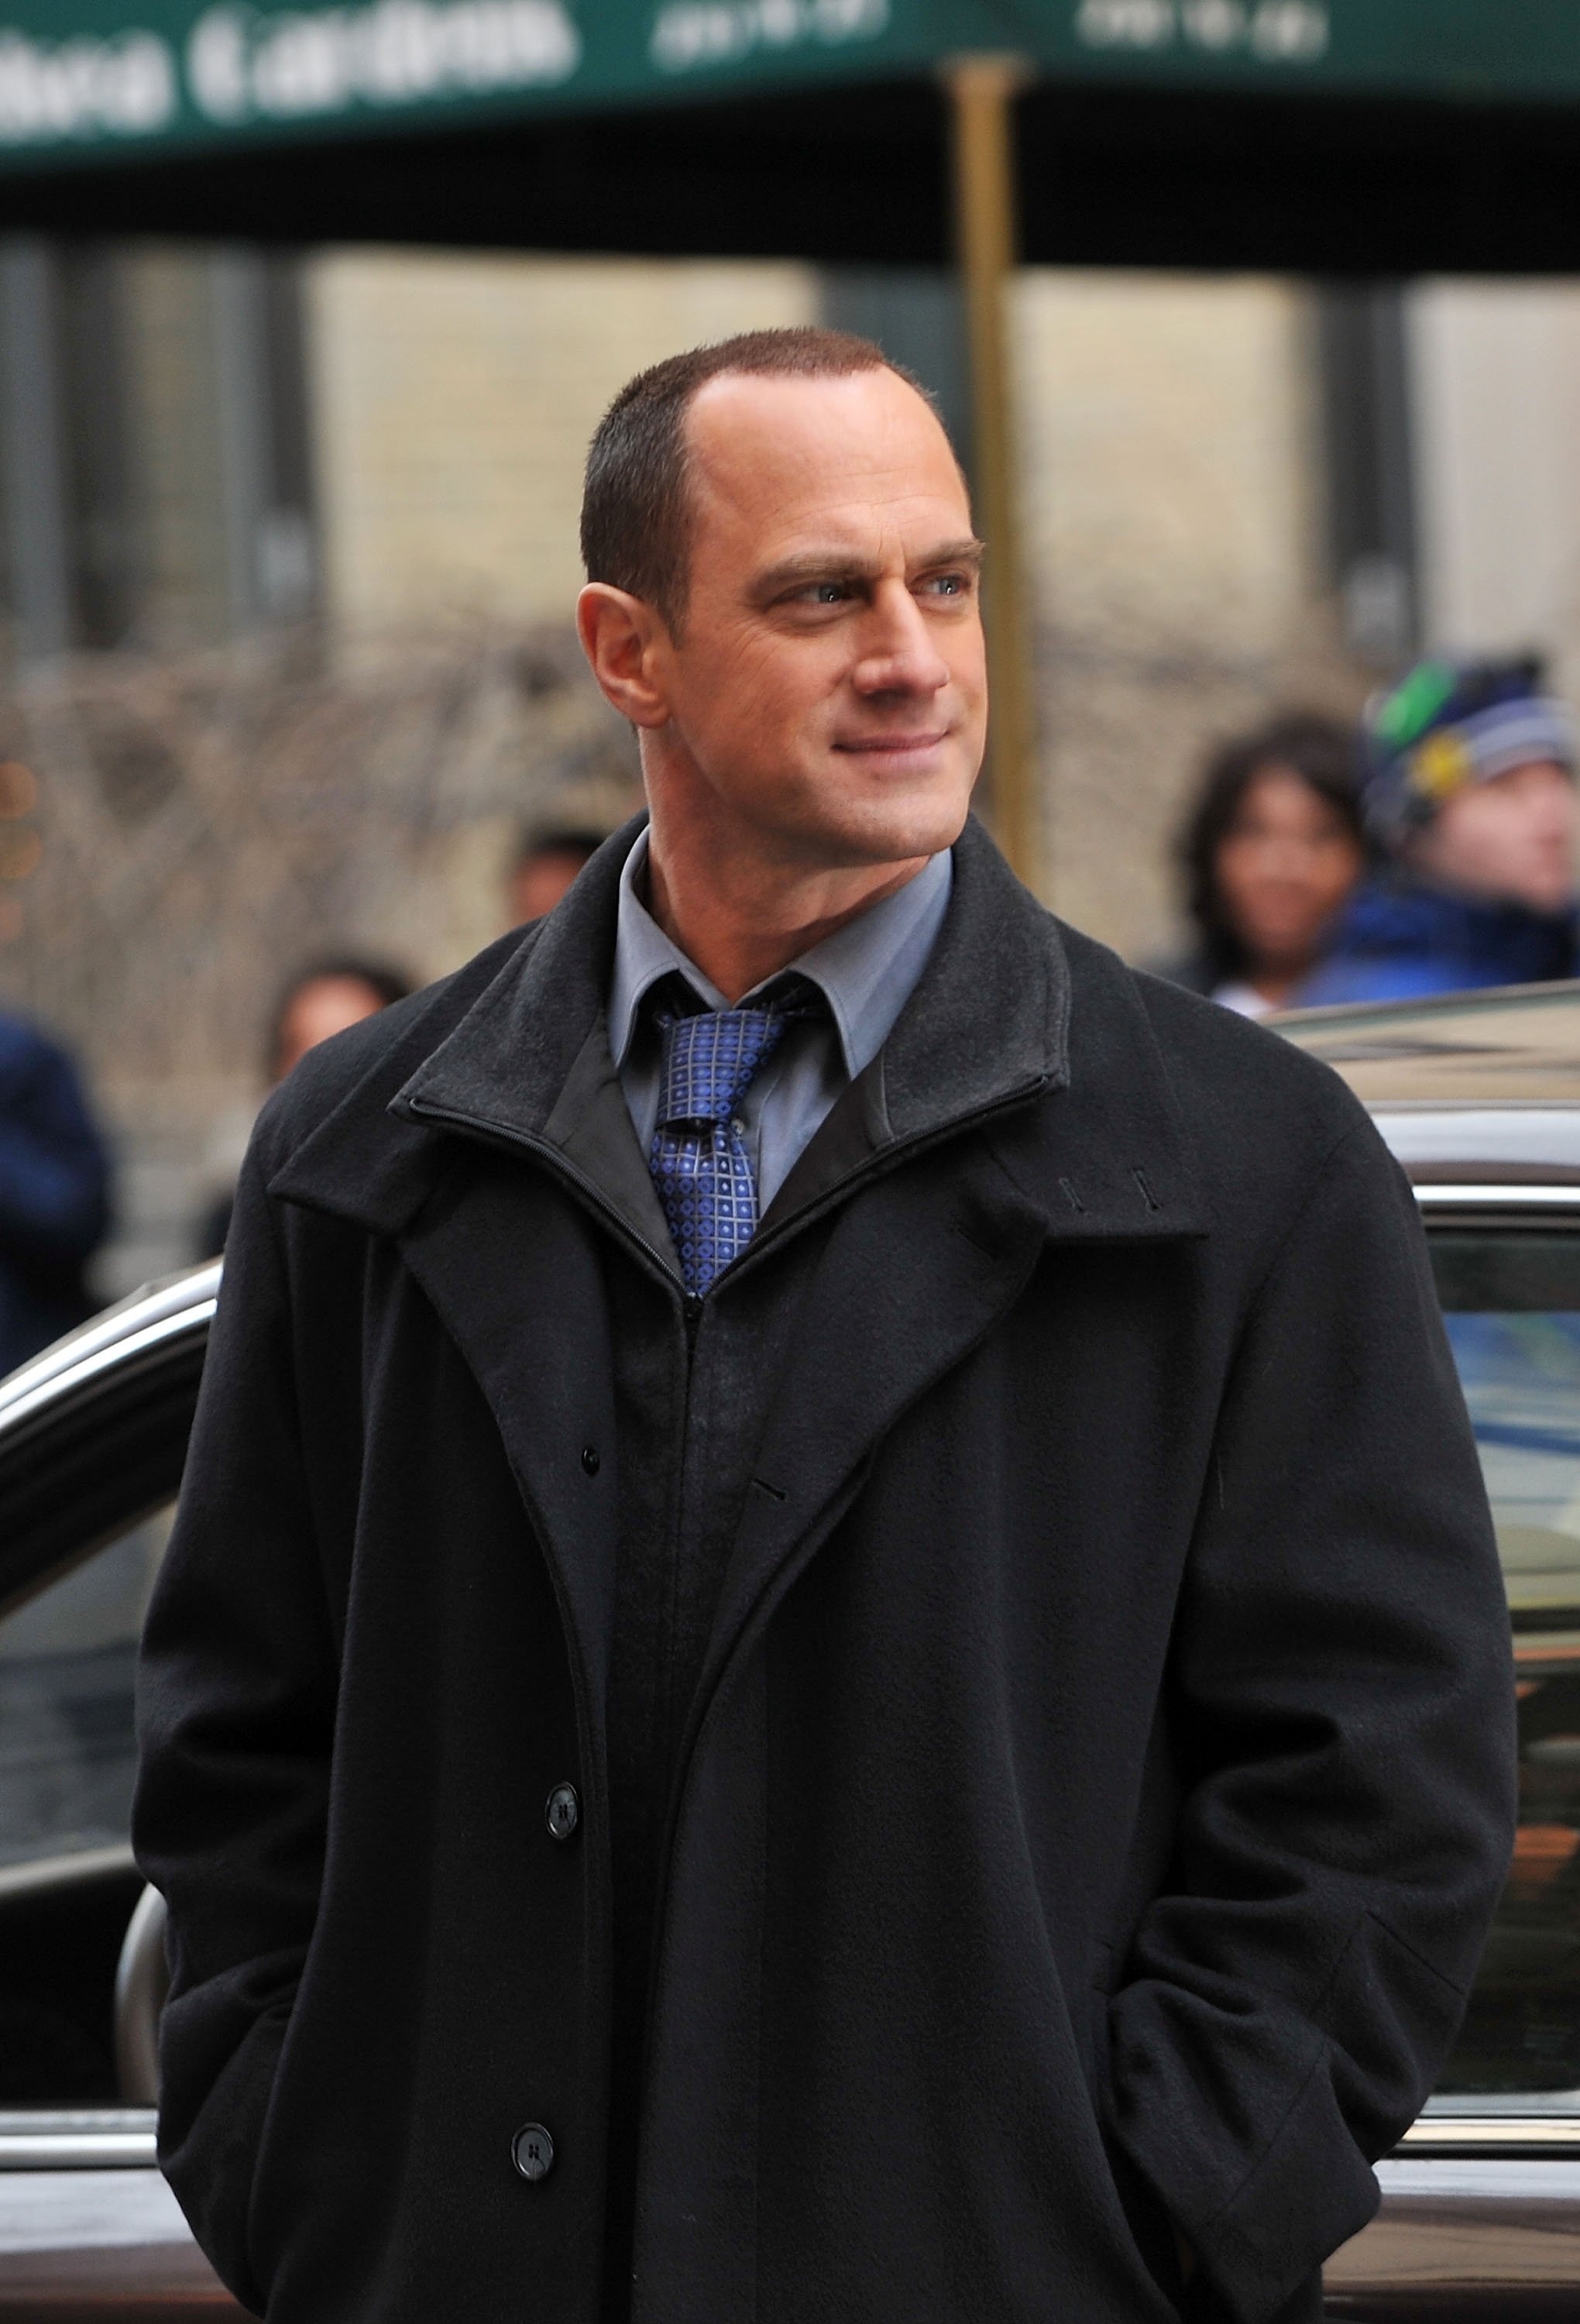 Christopher Meloni on location for "Law & Order: SVU" on the streets of Manhattan on January 26, 2010 | Photo: GettyImages